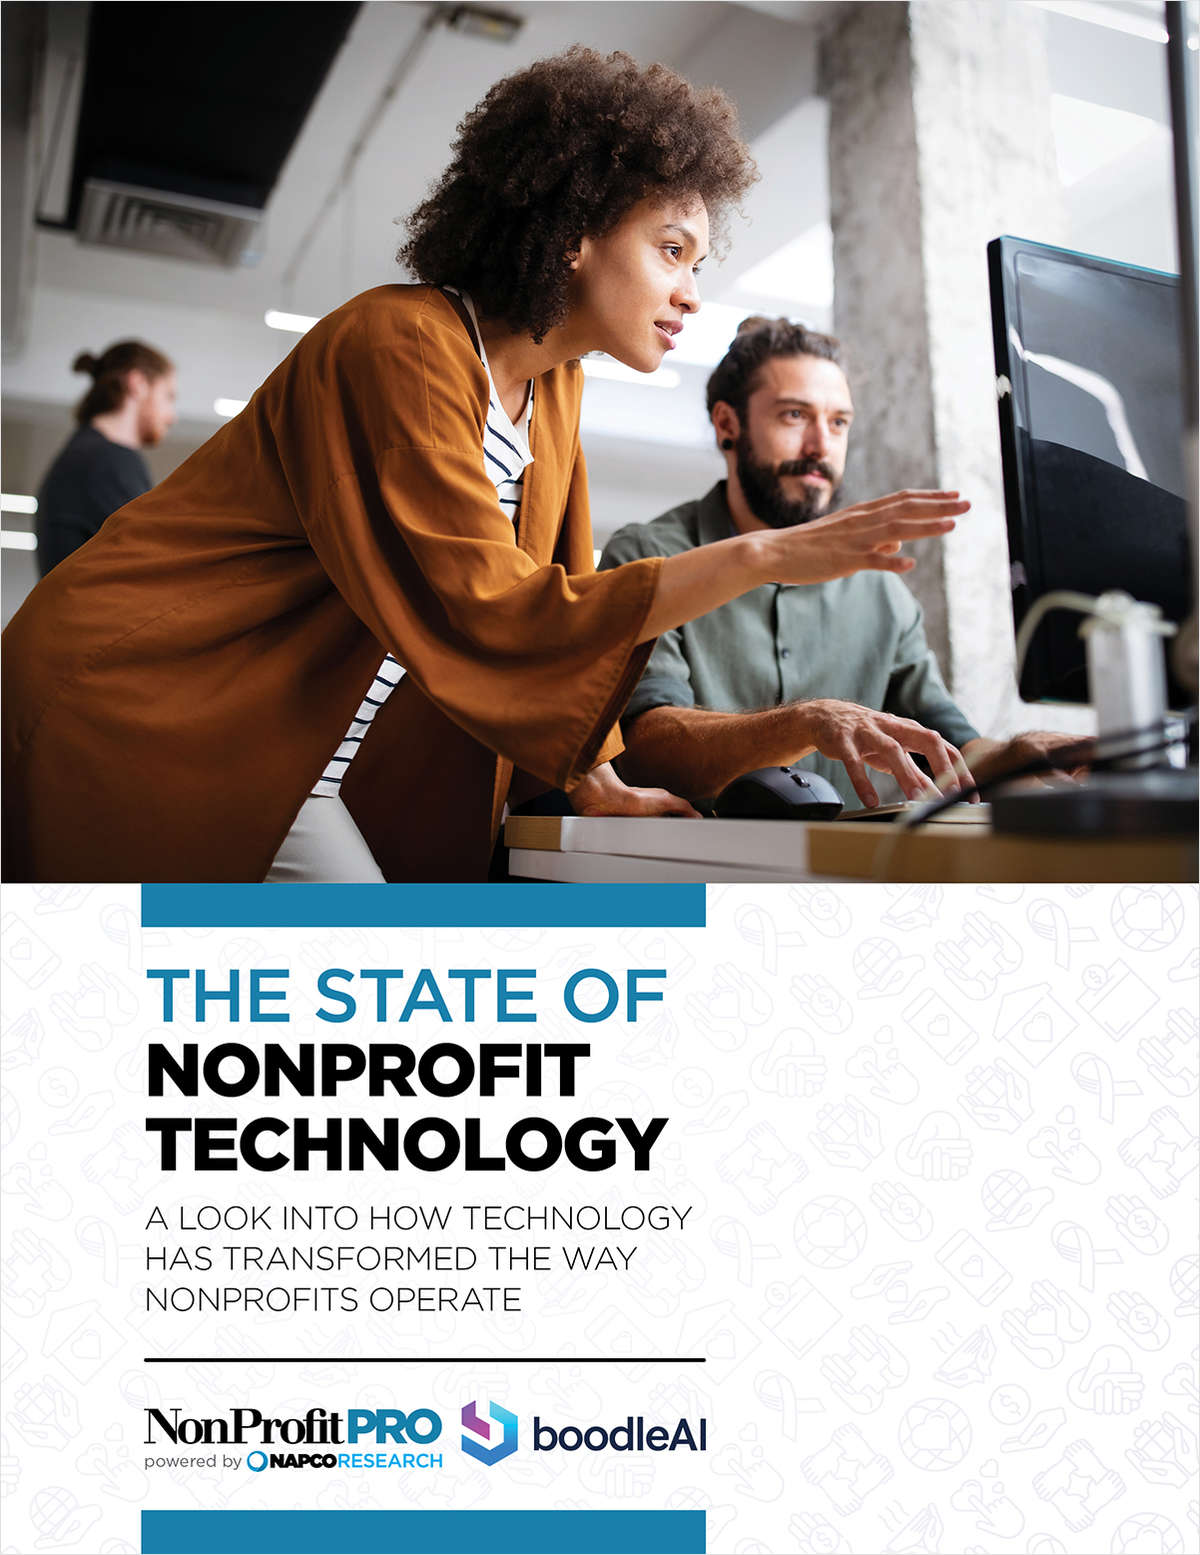 The State of Nonprofit Technology